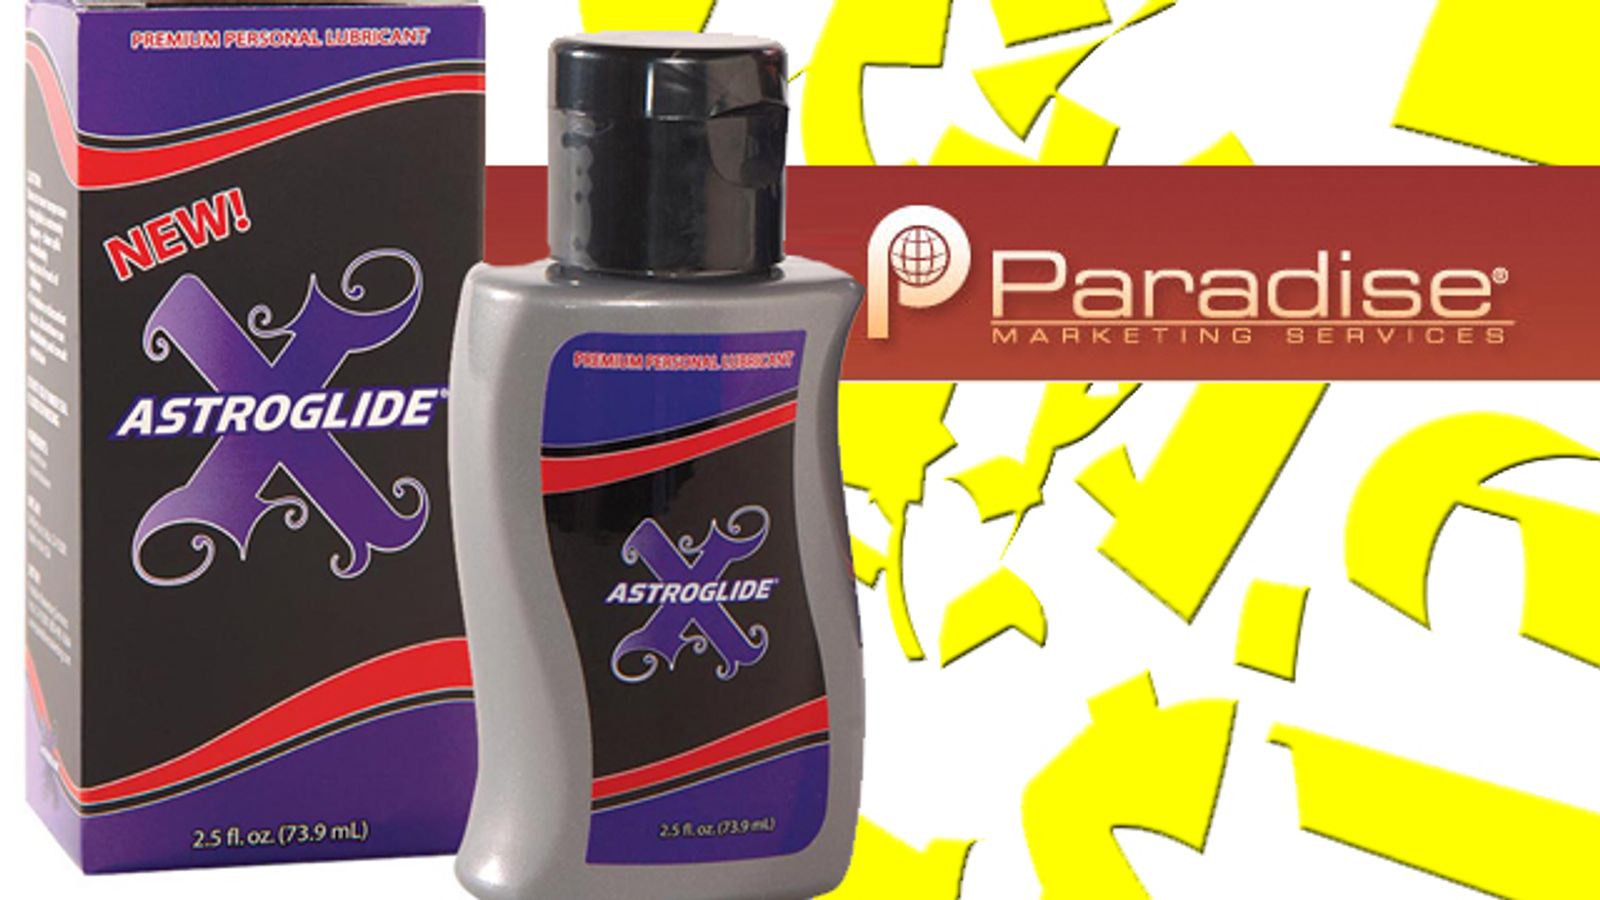 Paradise Gives Astroglide Buyers Chance at 'Golden Ticket'